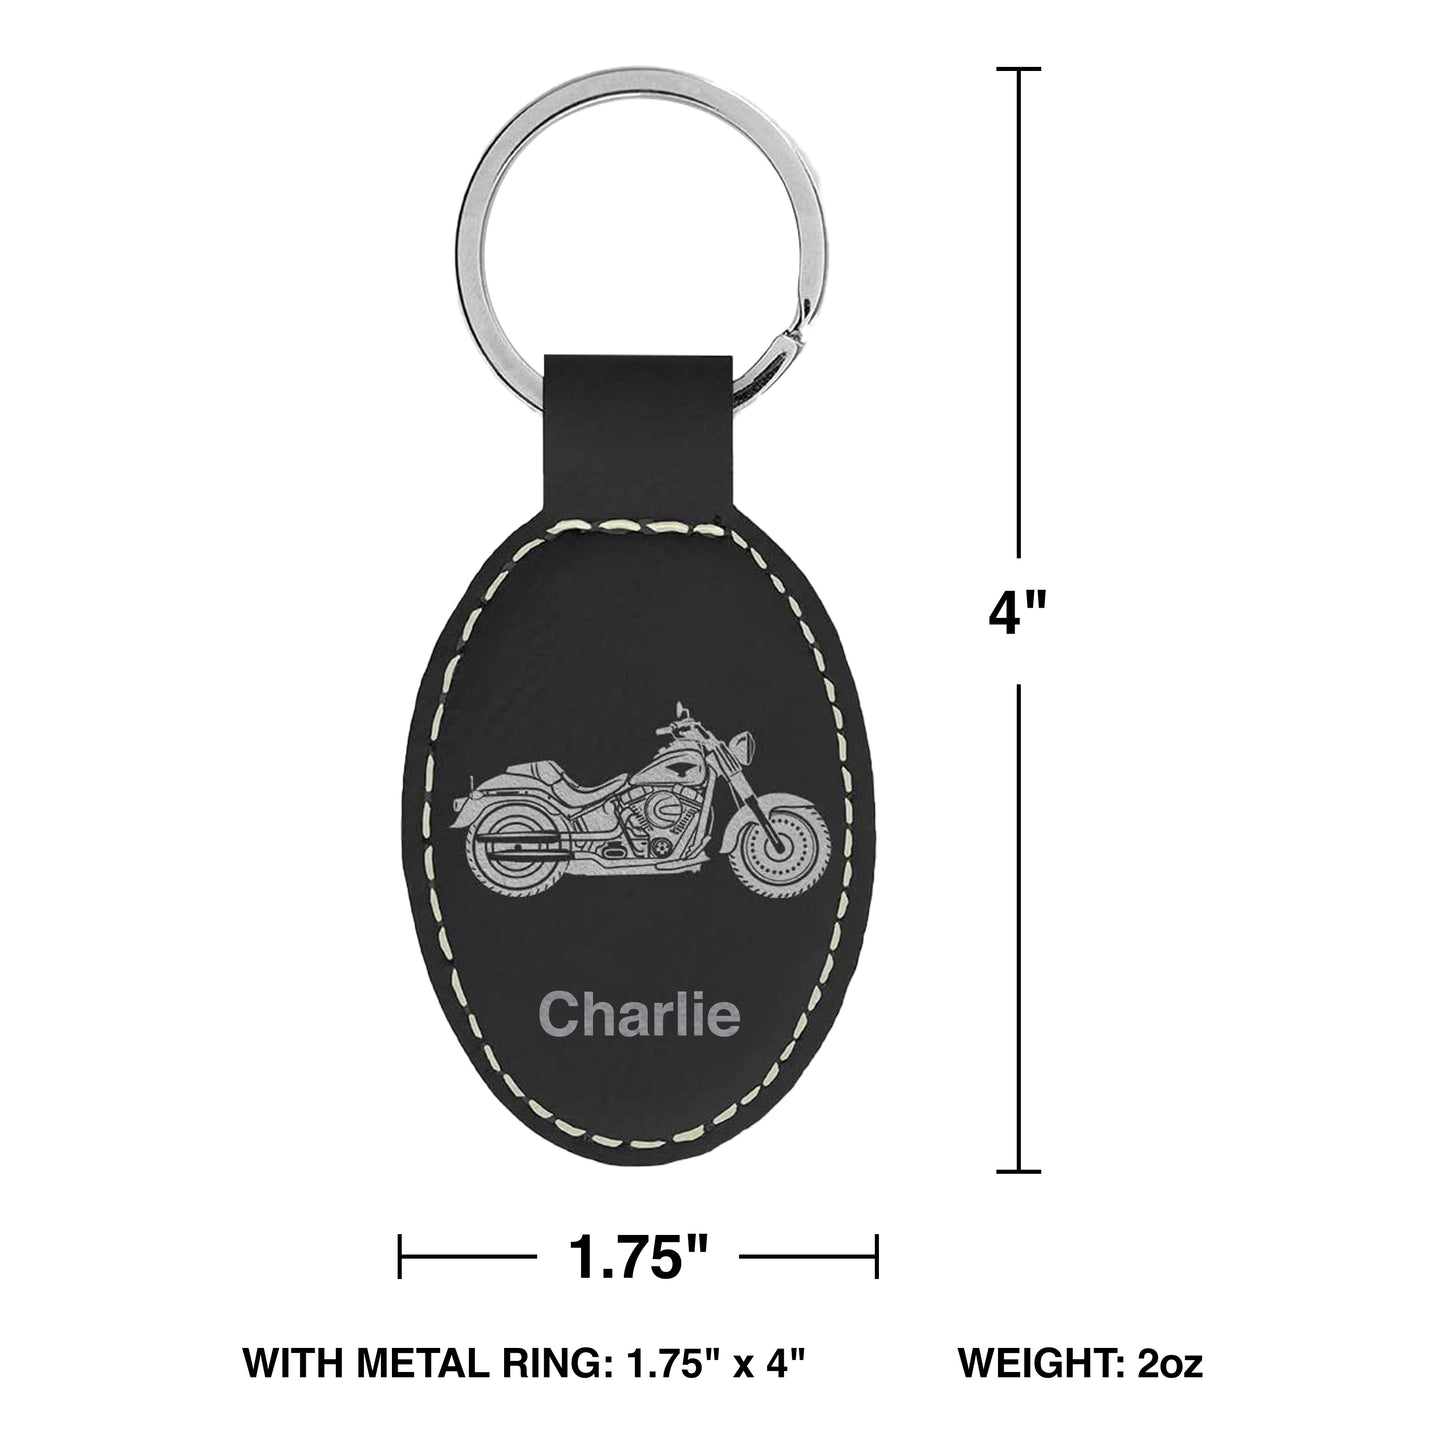 Faux Leather Oval Keychain, Emergency Dispatcher 911, Personalized Engraving Included